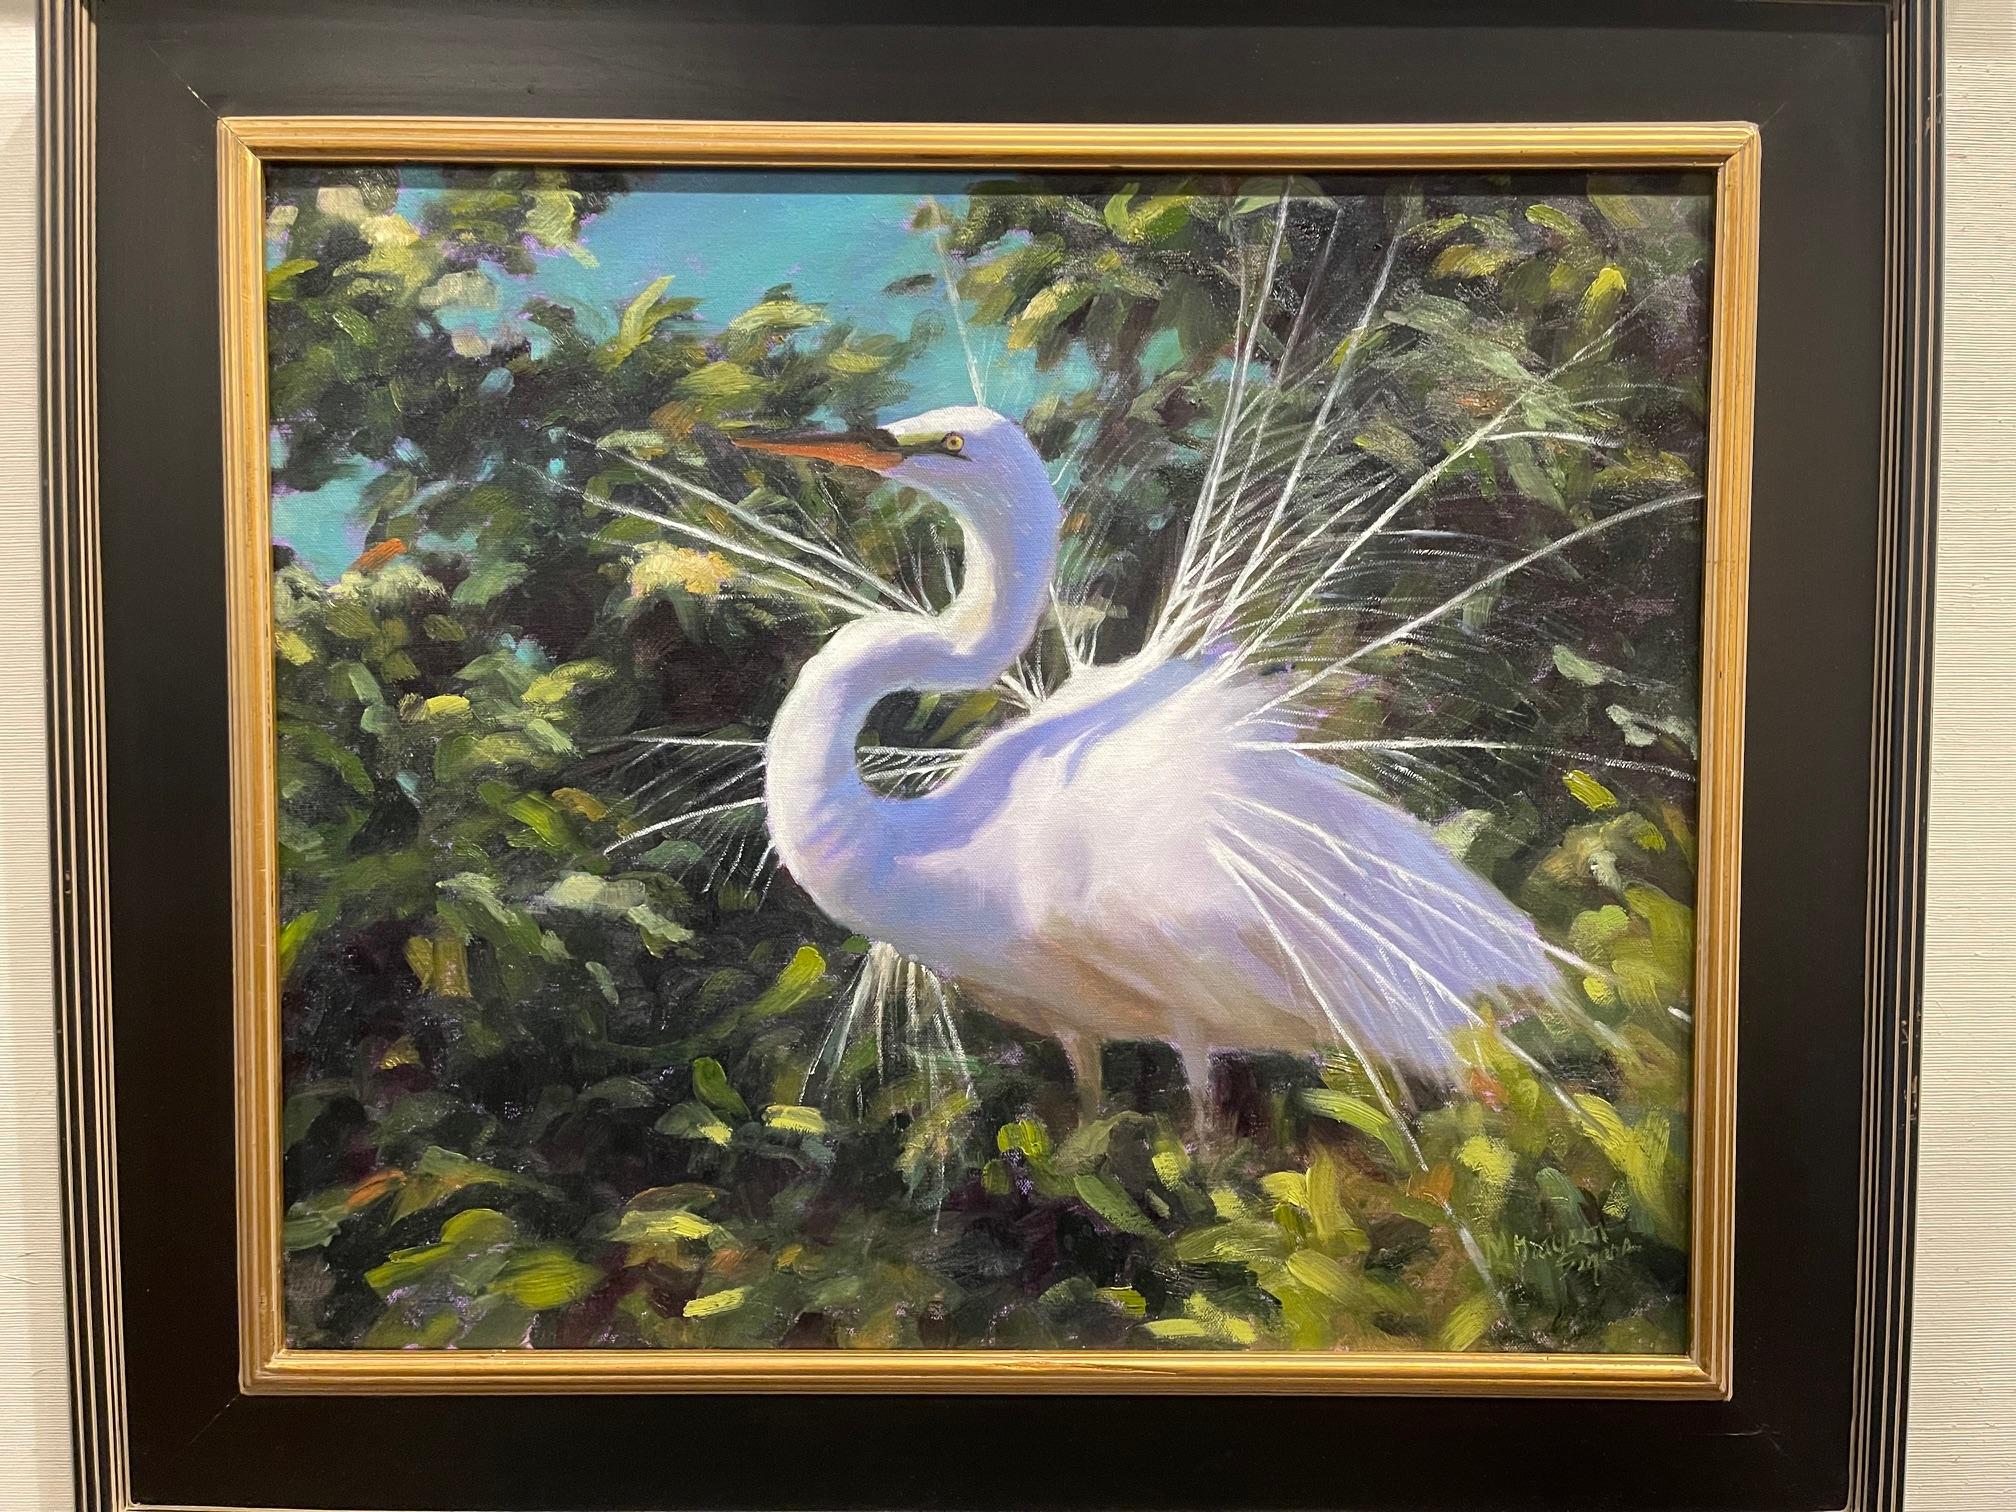 Mary Segars grew up in Blacksburg, VA, and attended the College of William & Mary, where she majored in Biology. She had an interest in art from the age of 7, but didn’t pick up a brush to paint until moving to Beaufort, SC in 1996. Mary is